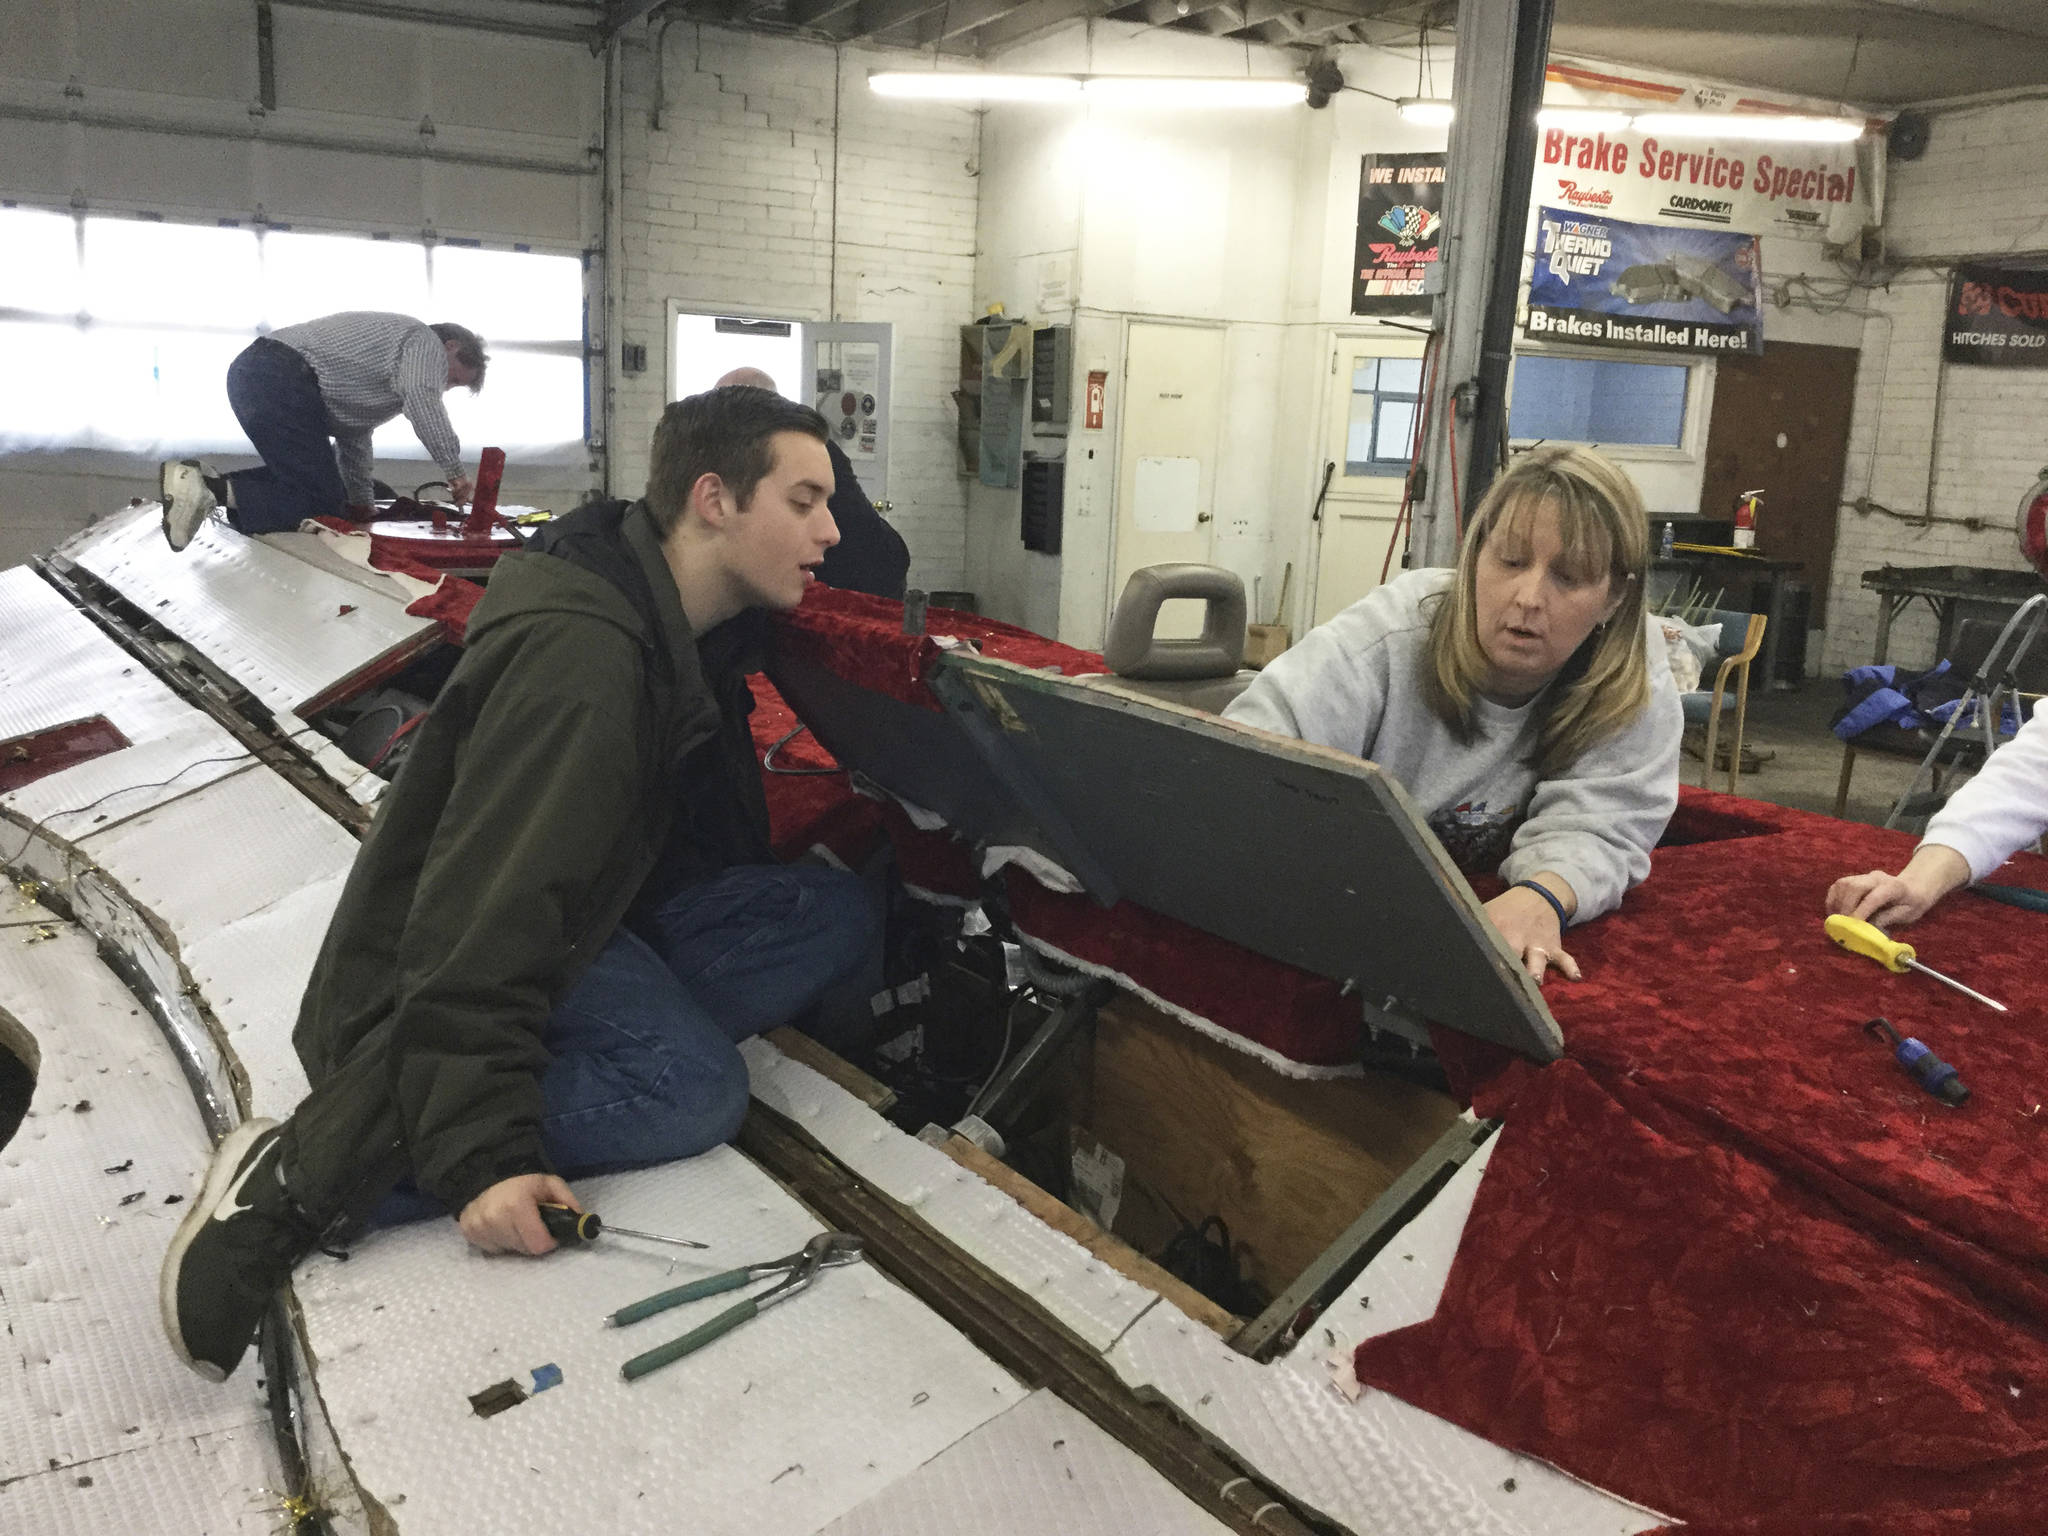 Maryfest board member Jodi Condyles and son, Peter, pull carpet up from the floor of the Marysville Strawberry Festival parade float and remove door hinges to strip down the float for this year’s new design and decorating.